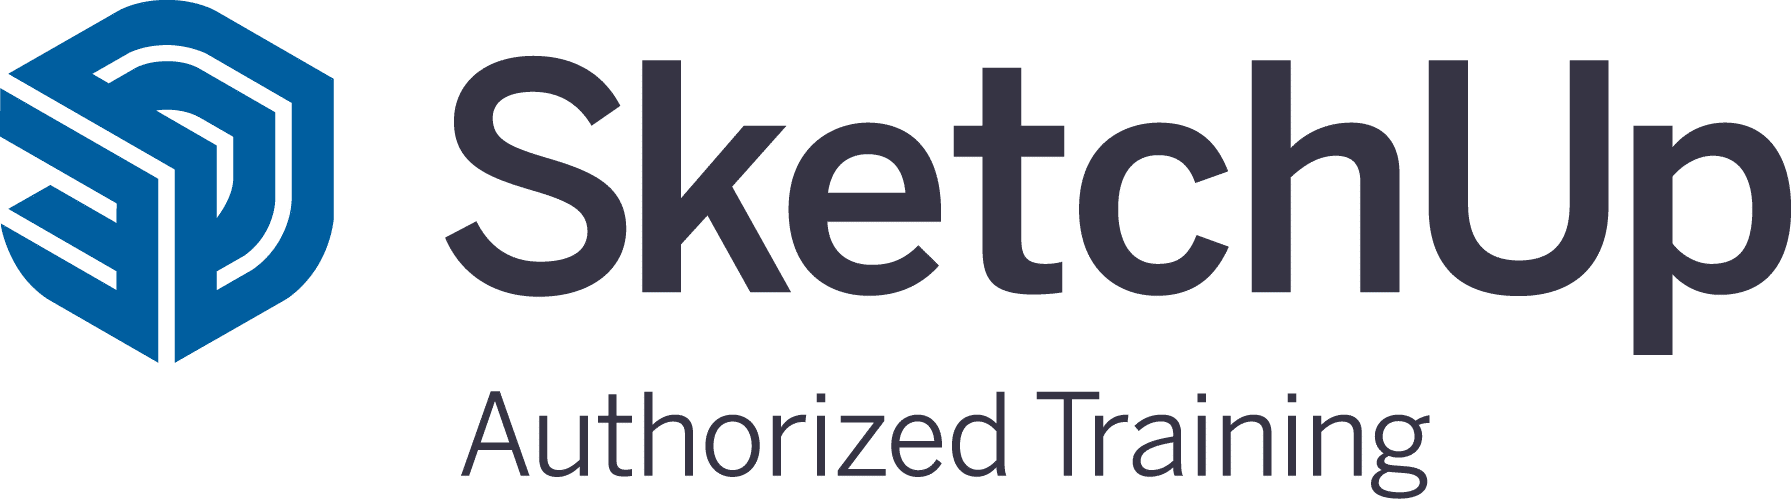 SketchUp Authorized Training Vertical 240